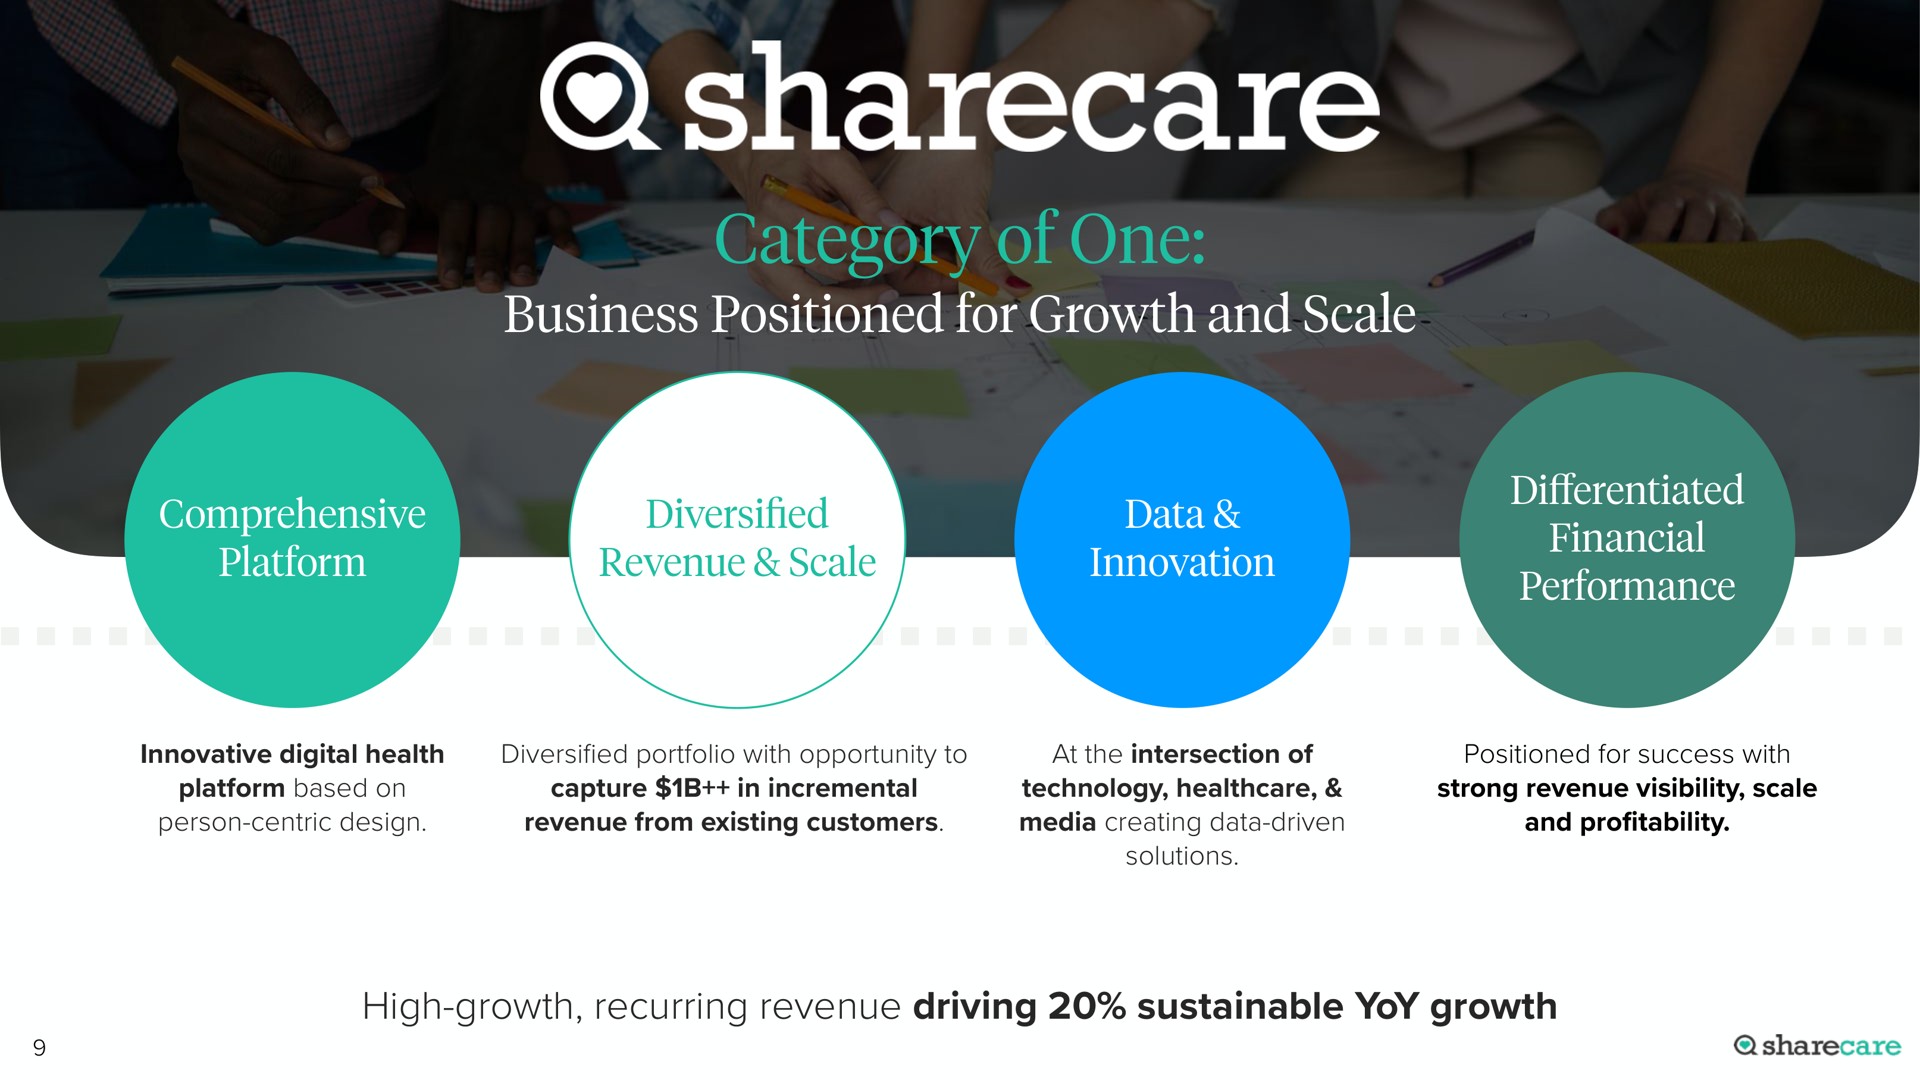 category of one business positioned for growth and scale | Sharecare